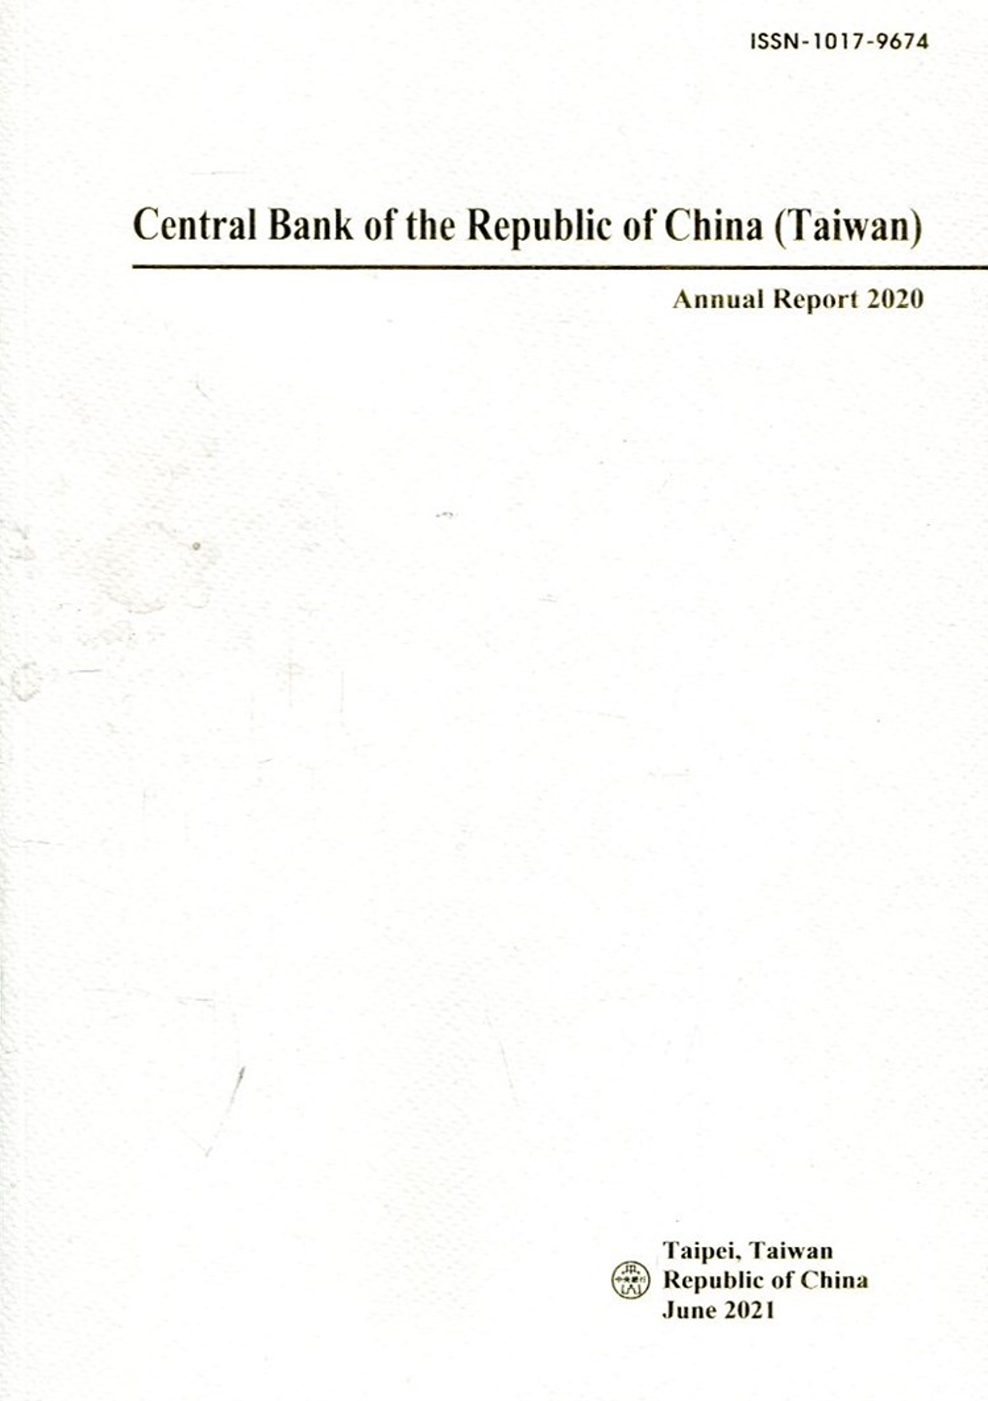 Annual Report,The Central Bank...